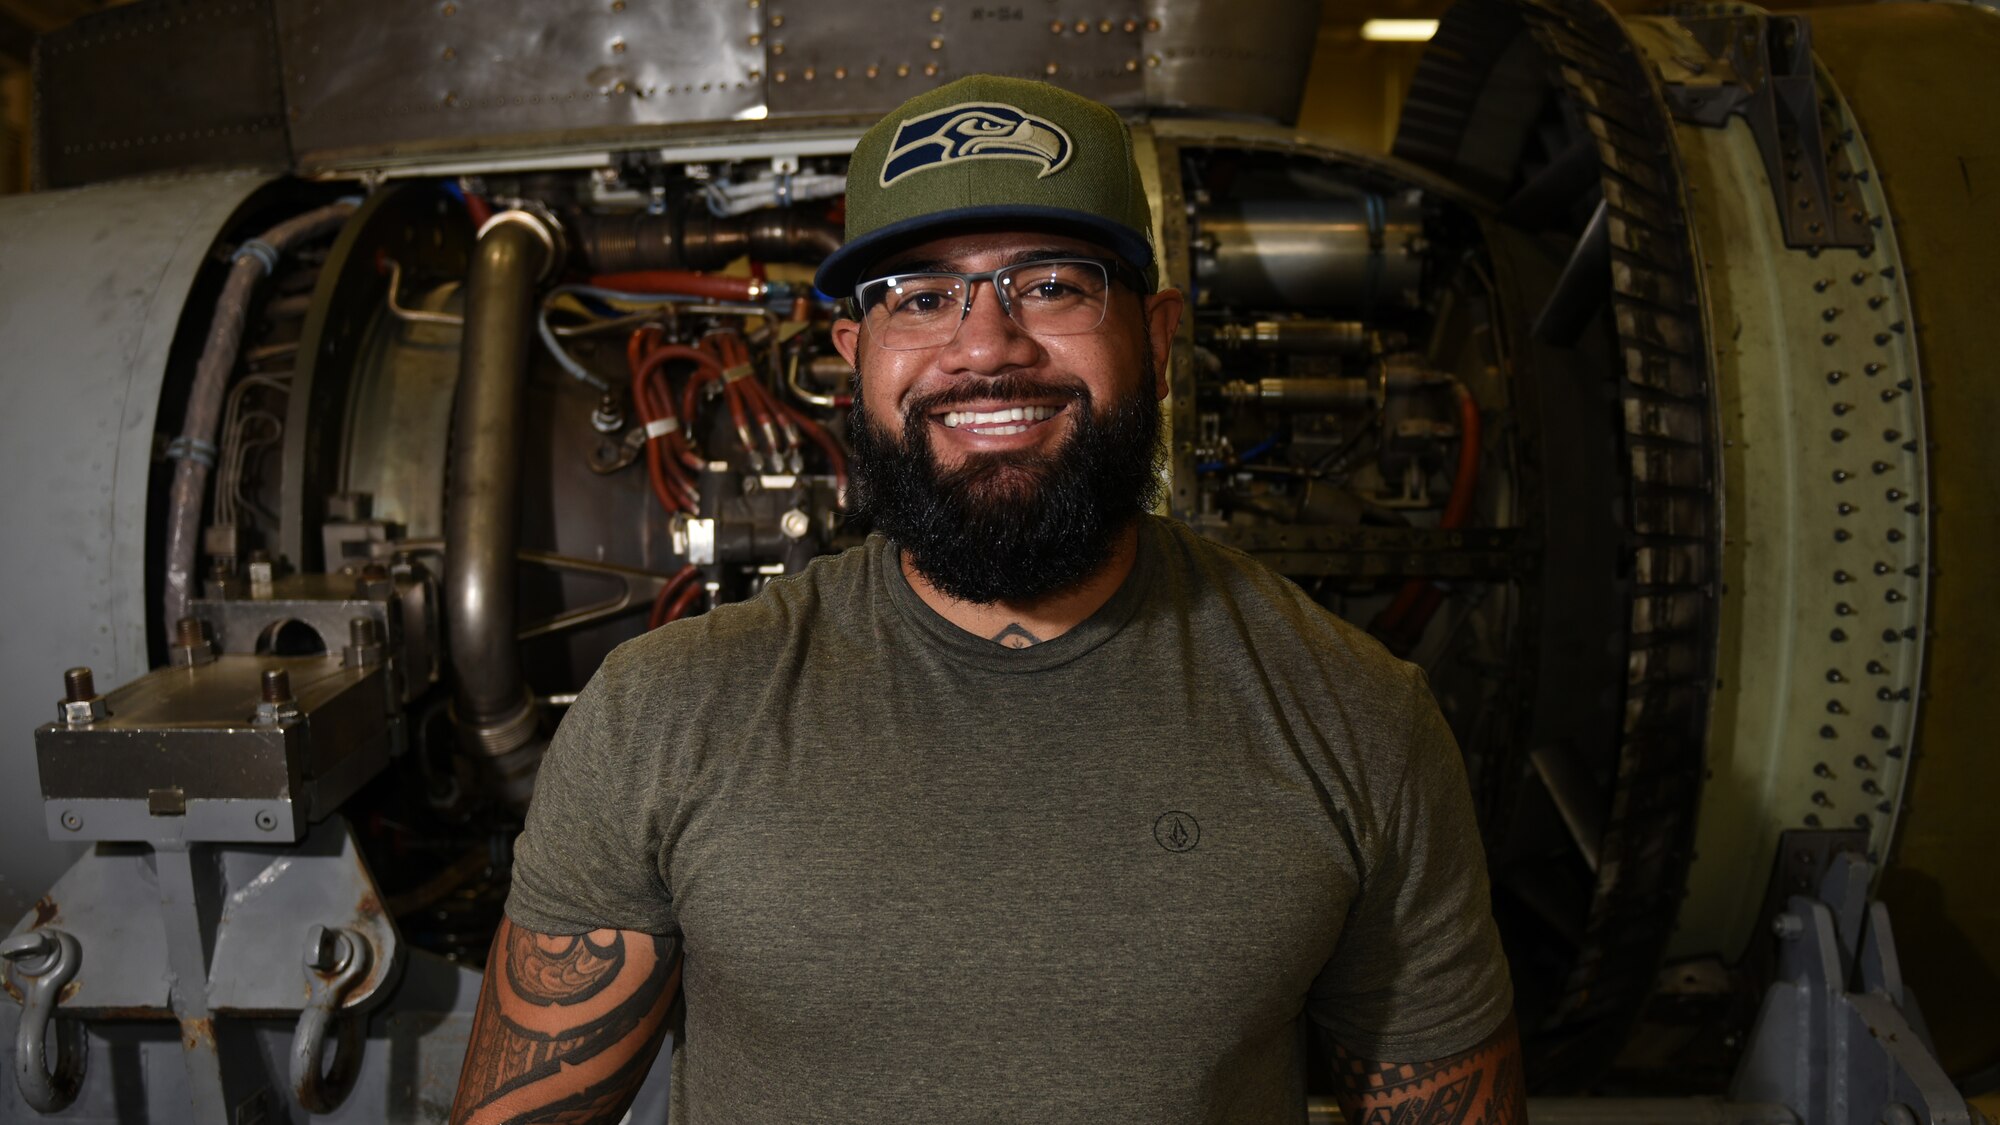 Photo of an engine mechanic in front of an aircraft engine